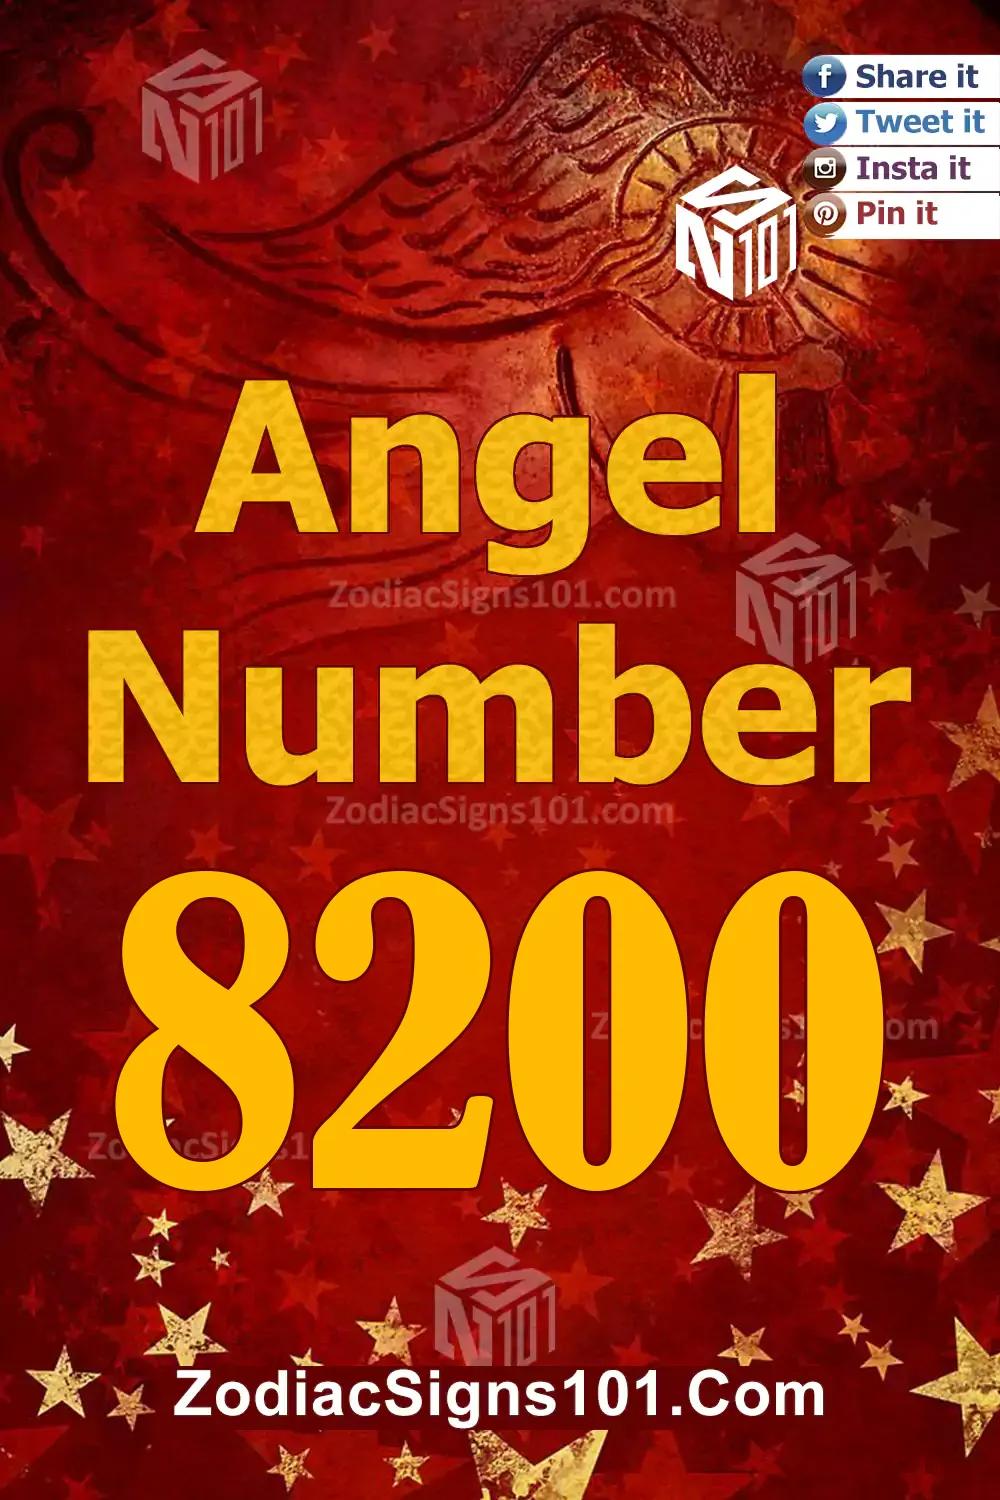 8200 Angel Number Meaning